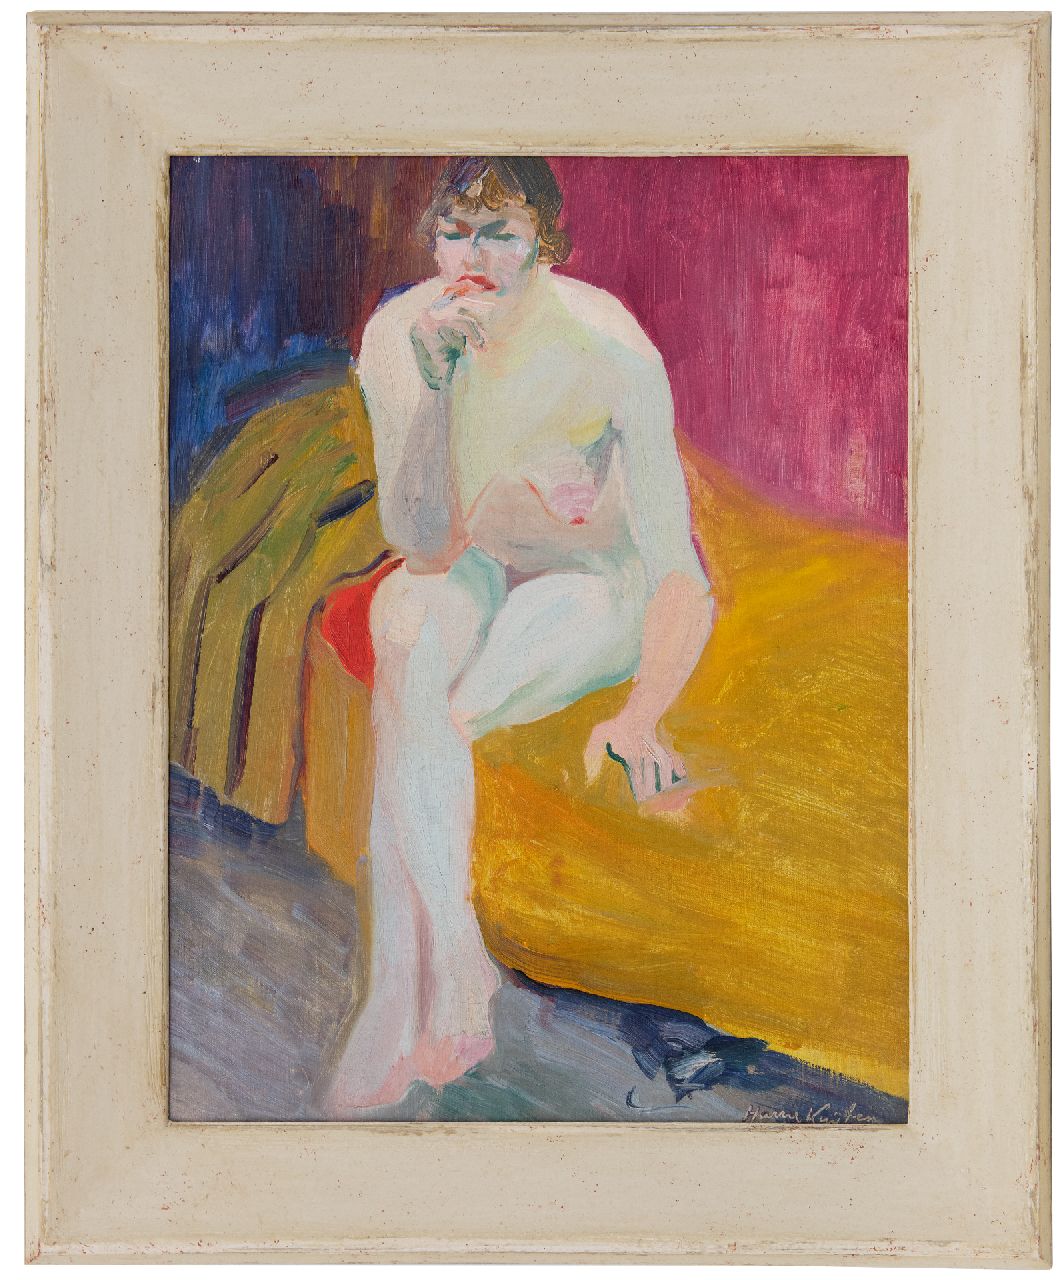 Kuijten H.J.  | Henricus Johannes 'Harrie' Kuijten | Paintings offered for sale | Seated nude, oil on canvas 53.0 x 40.7 cm, signed l.r.